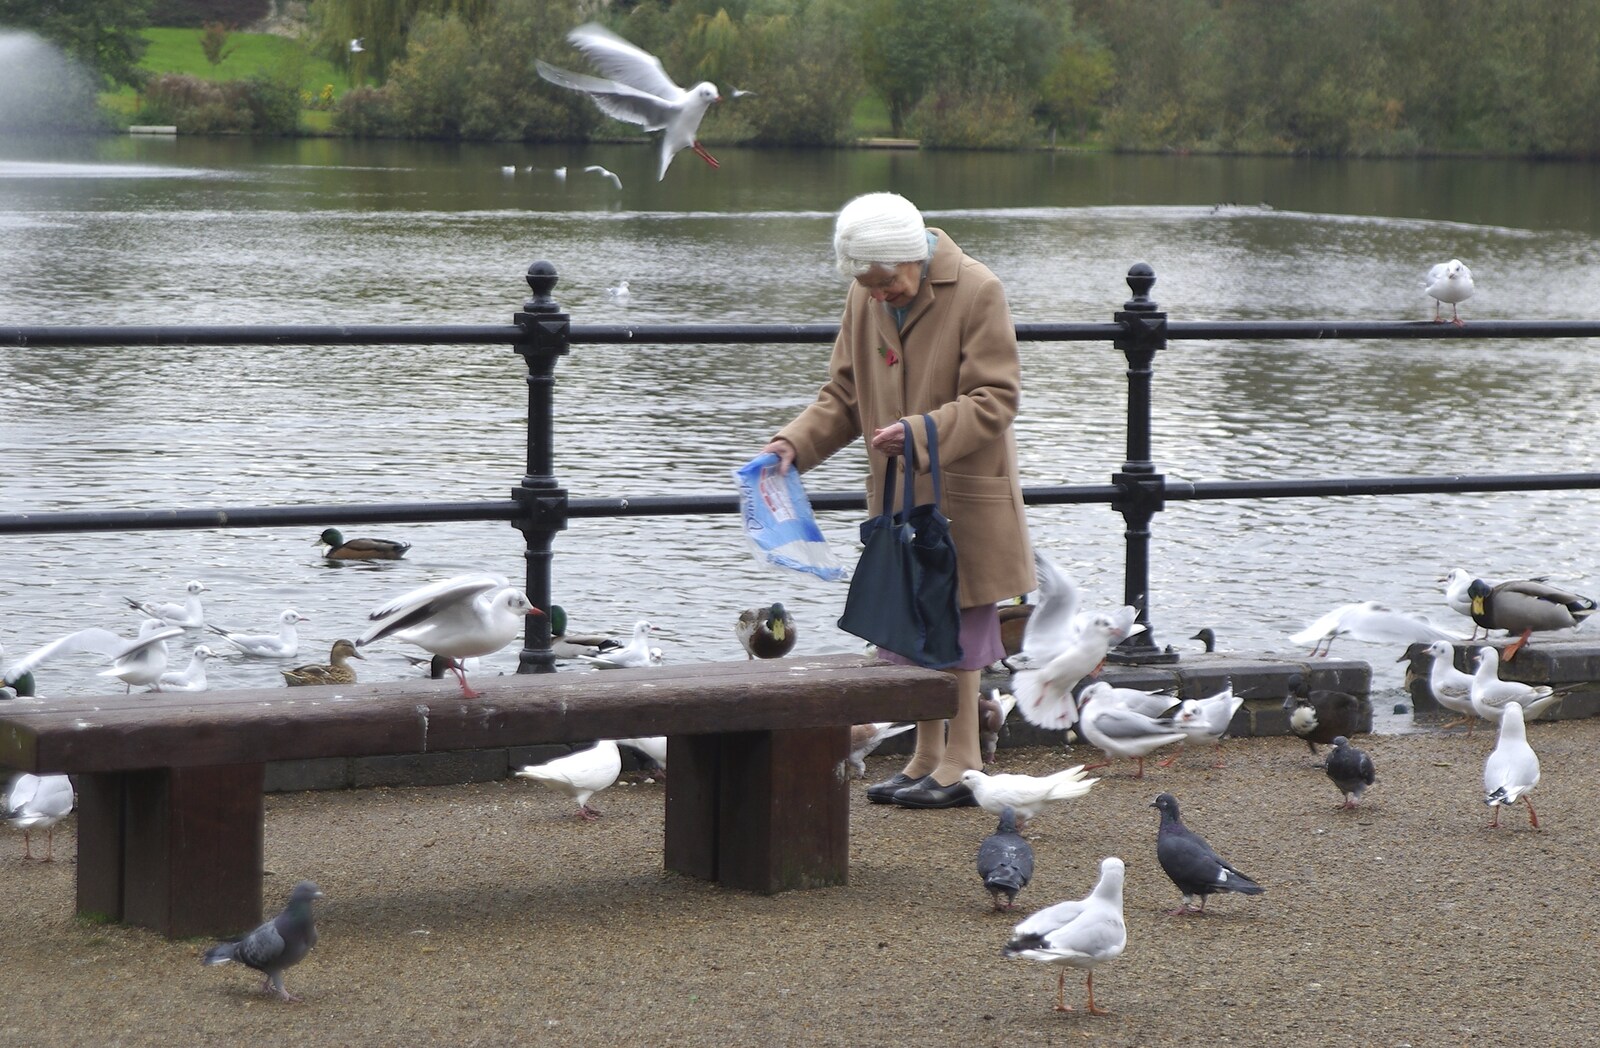 An old woman is mobbed by seagulls as she tries to feed the ducks from Isobel's Birthday and a Café Miscellany, Cambridge and Suffolk - 2nd November 2008